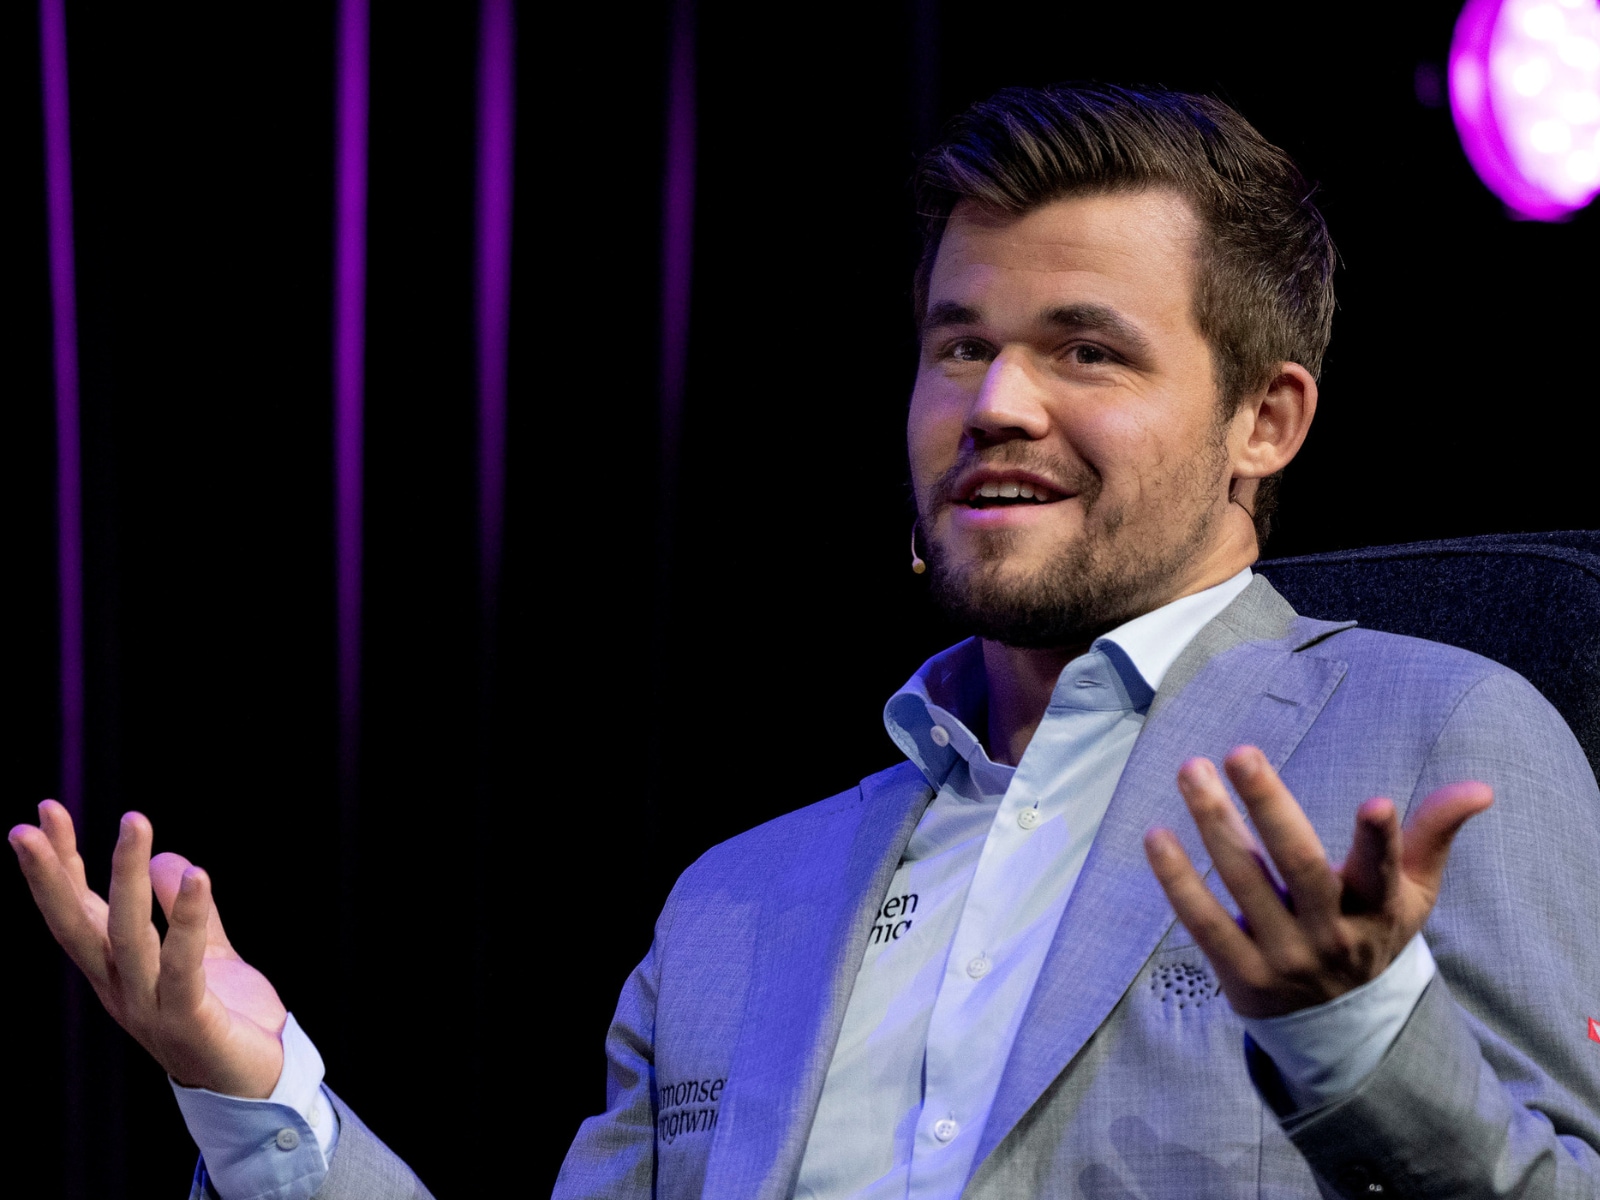 Magnus Carlsen withdraws from Chess Cup amid Hans Niemann cheating  accusations - Dexerto